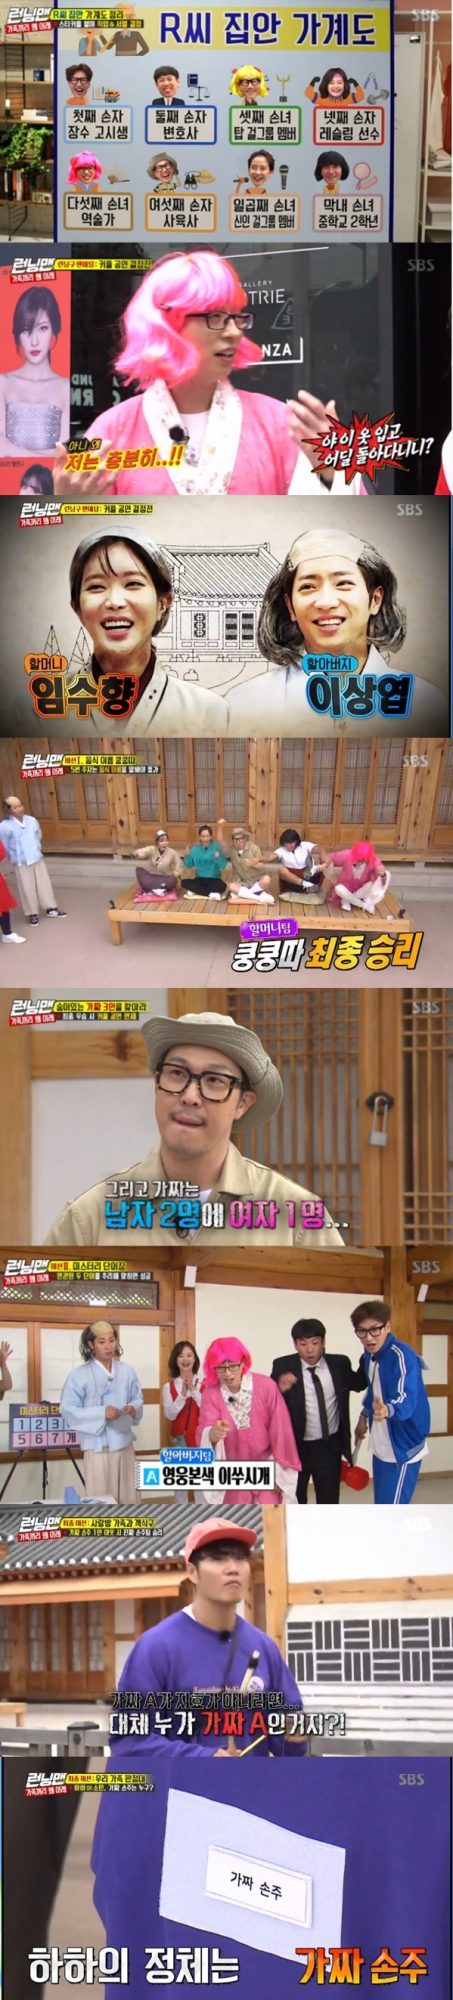 Yoo Jae-Suk and Haha will show off their couple stage at SBS Running Mans 9th anniversary fan meeting.According to Nielsen Korea, the ratings agency, Running Man, which aired on the 26th, soared to the highest audience rating of 7.9% per minute, and ranked first in the same time zone with 3.1% (based on the second part of the audience rating of Seoul Capital Area) in the 2049 target audience rating, which is an important indicator of major advertising officials.The average audience rating was 4.9% in the first part and 6.6% in the second part (based on the audience rating of the Seoul Capital Area household).The broadcast was previously made up of the second story of the 9th anniversary project Running Man Fan Meeting - Running Zone Project.Members who announced the group dance for the first time on the show last week, this time, they went on a Fake Grandchild Race over a couple performance.In this race, the real grandchildren and the Passion grandchildren had to find out the fake three to win the race, and the fake three won the passion grandchildren.The members of the eight were divided into cousins.Actors Im Soo-hyang and Lee Sang-yeob appeared as Grandmas Boy of the family and said, Why are our grandchildren five, why are eight?The mission was divided into grandfather team and Grandmas Boy team, and the Grandmas Boy team got a hint of two fake men and one woman with the first mission food name kungta.Later, through the mission, Lee Kwang-soo noticed that Lee Sang-yeob and Im Soo-hyang were fake, and Haha, a fake grandson, was also identified.The scene had the highest audience rating of 7.9% per minute, accounting for the best one minute.In the end, even if the couple Haha was decided to be a couple stage performer, Yoo Jae-Suk won the additional one-person lottery, and the two of them went on a fan meeting as partners.